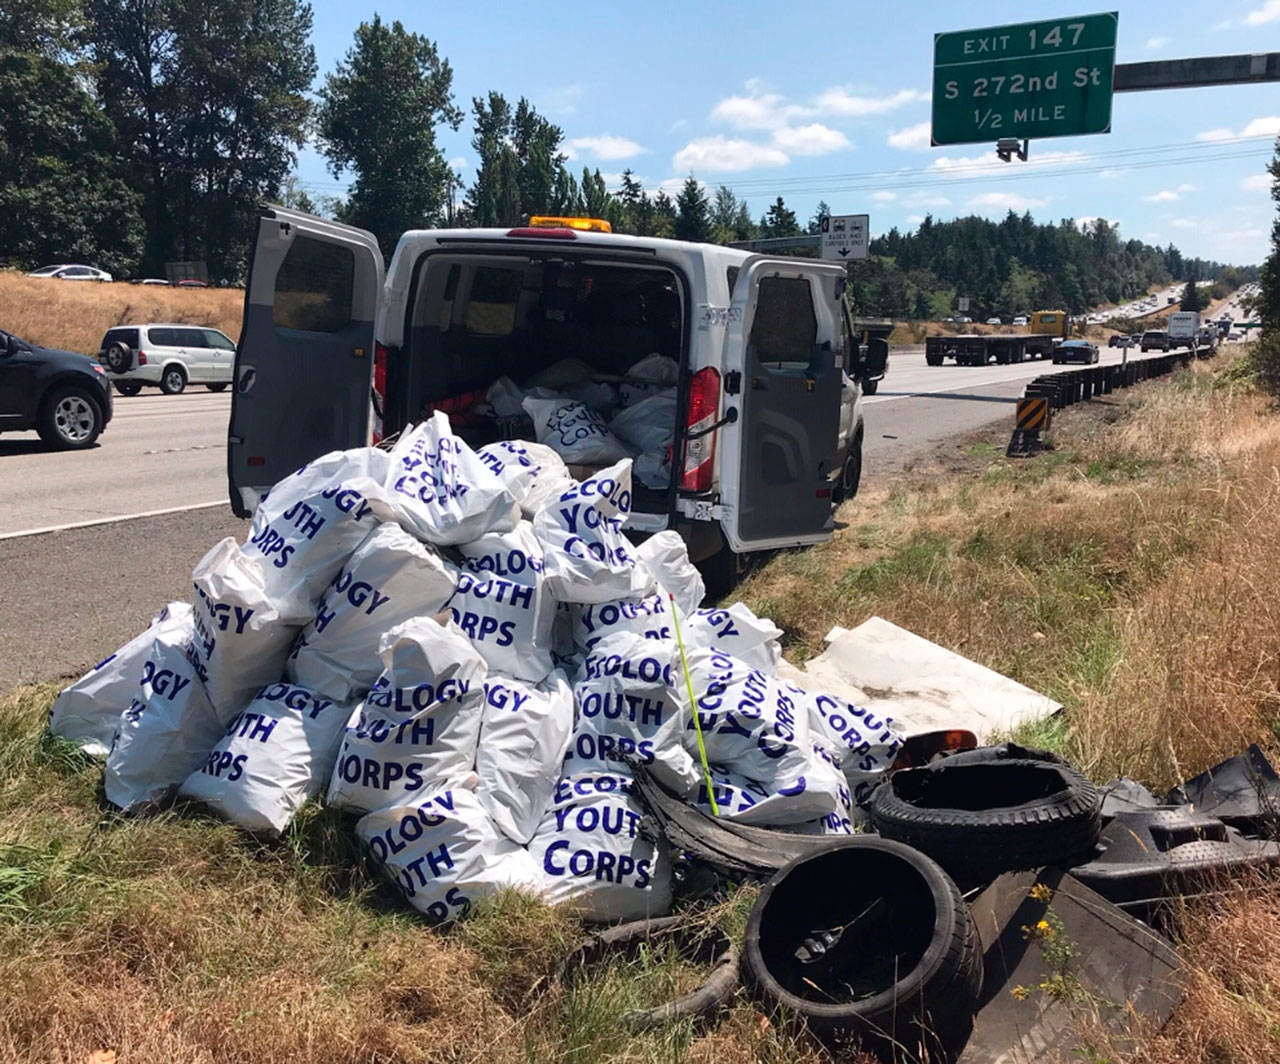 The Department of Ecology Youth Corps clean up trash littered along major Washington highways and freeways during a summer job opportunity program. COURTESY PHOTO, Steven Williams